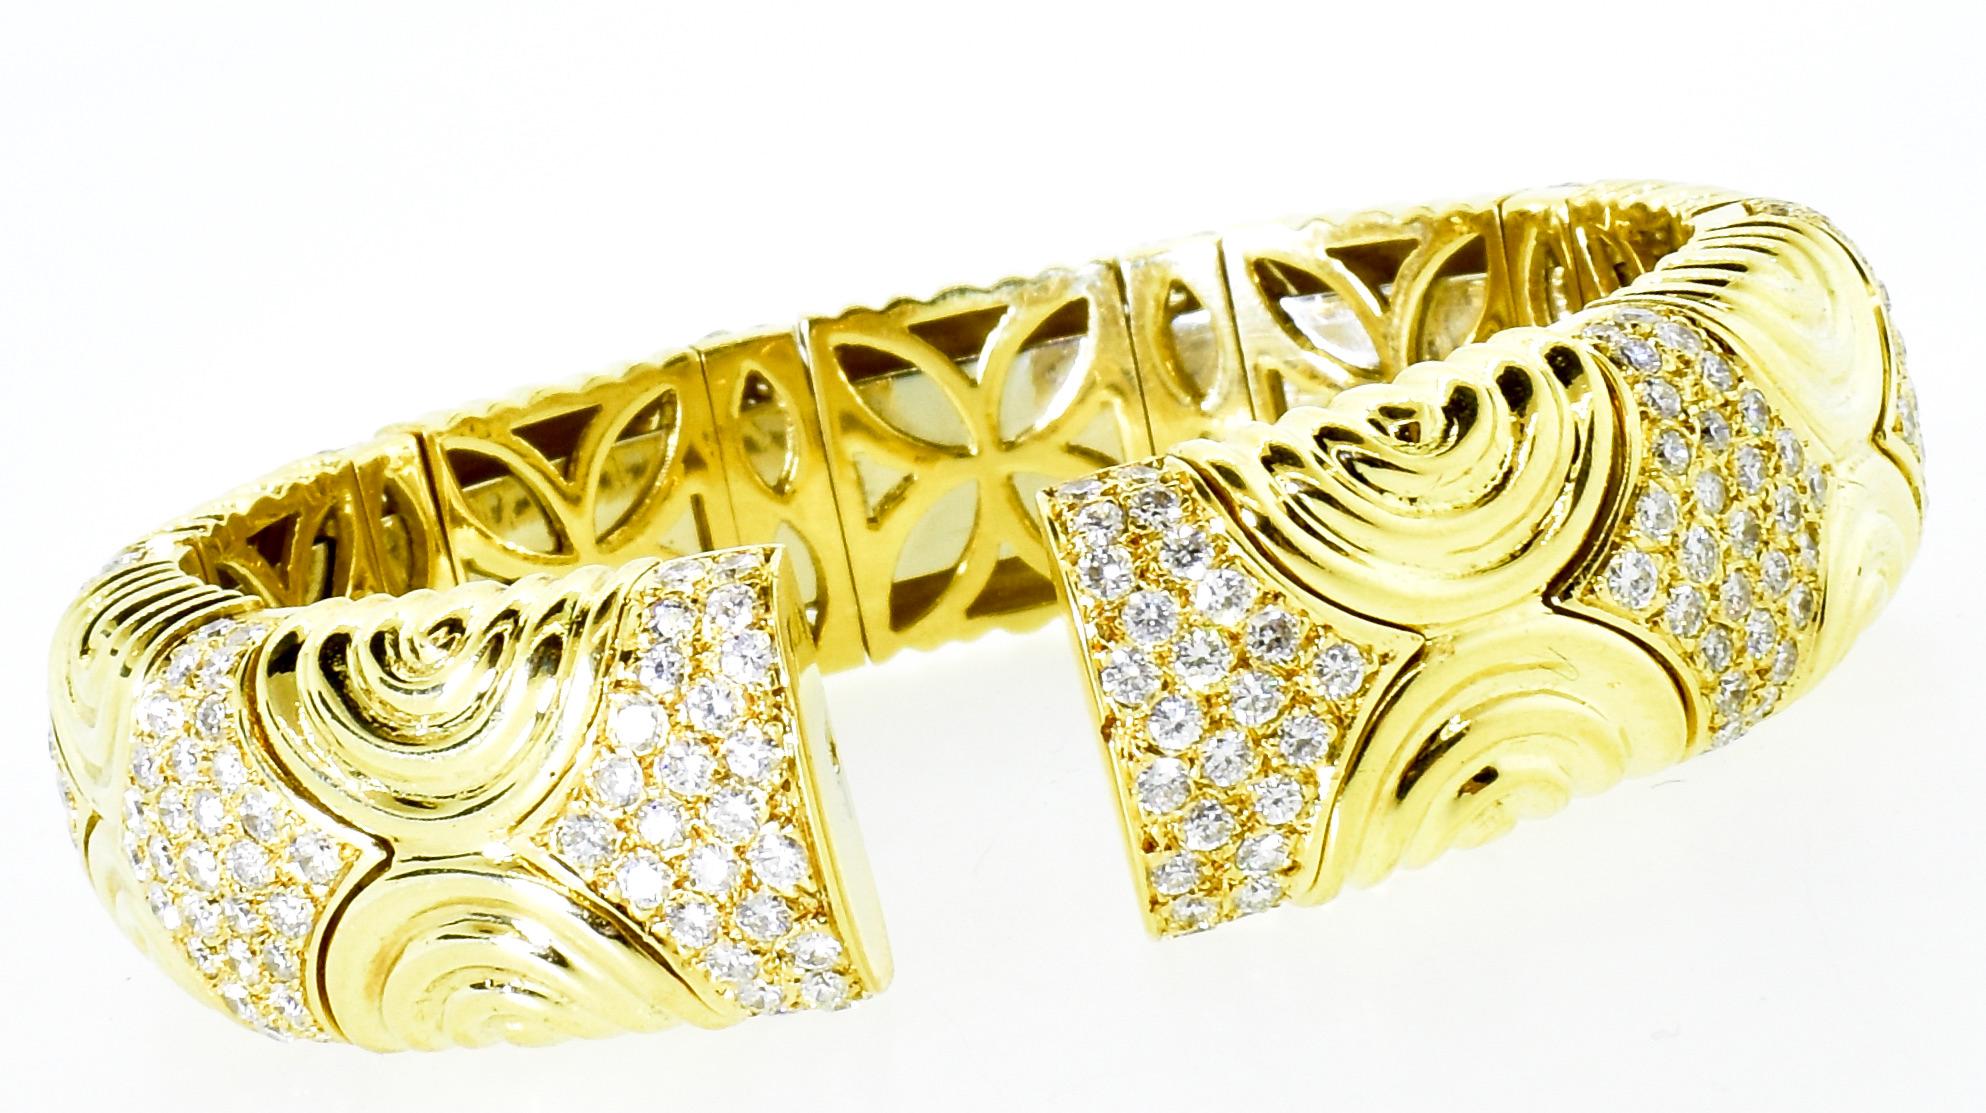 18K yellow gold bracelet possessing fine white brilliant cut diamonds.  The pave set diamonds are estimated to weigh 6.5 cts., all are near colorless (H), and very slightly included (VS).  The diamonds are well cut and well matched.  The bracelet